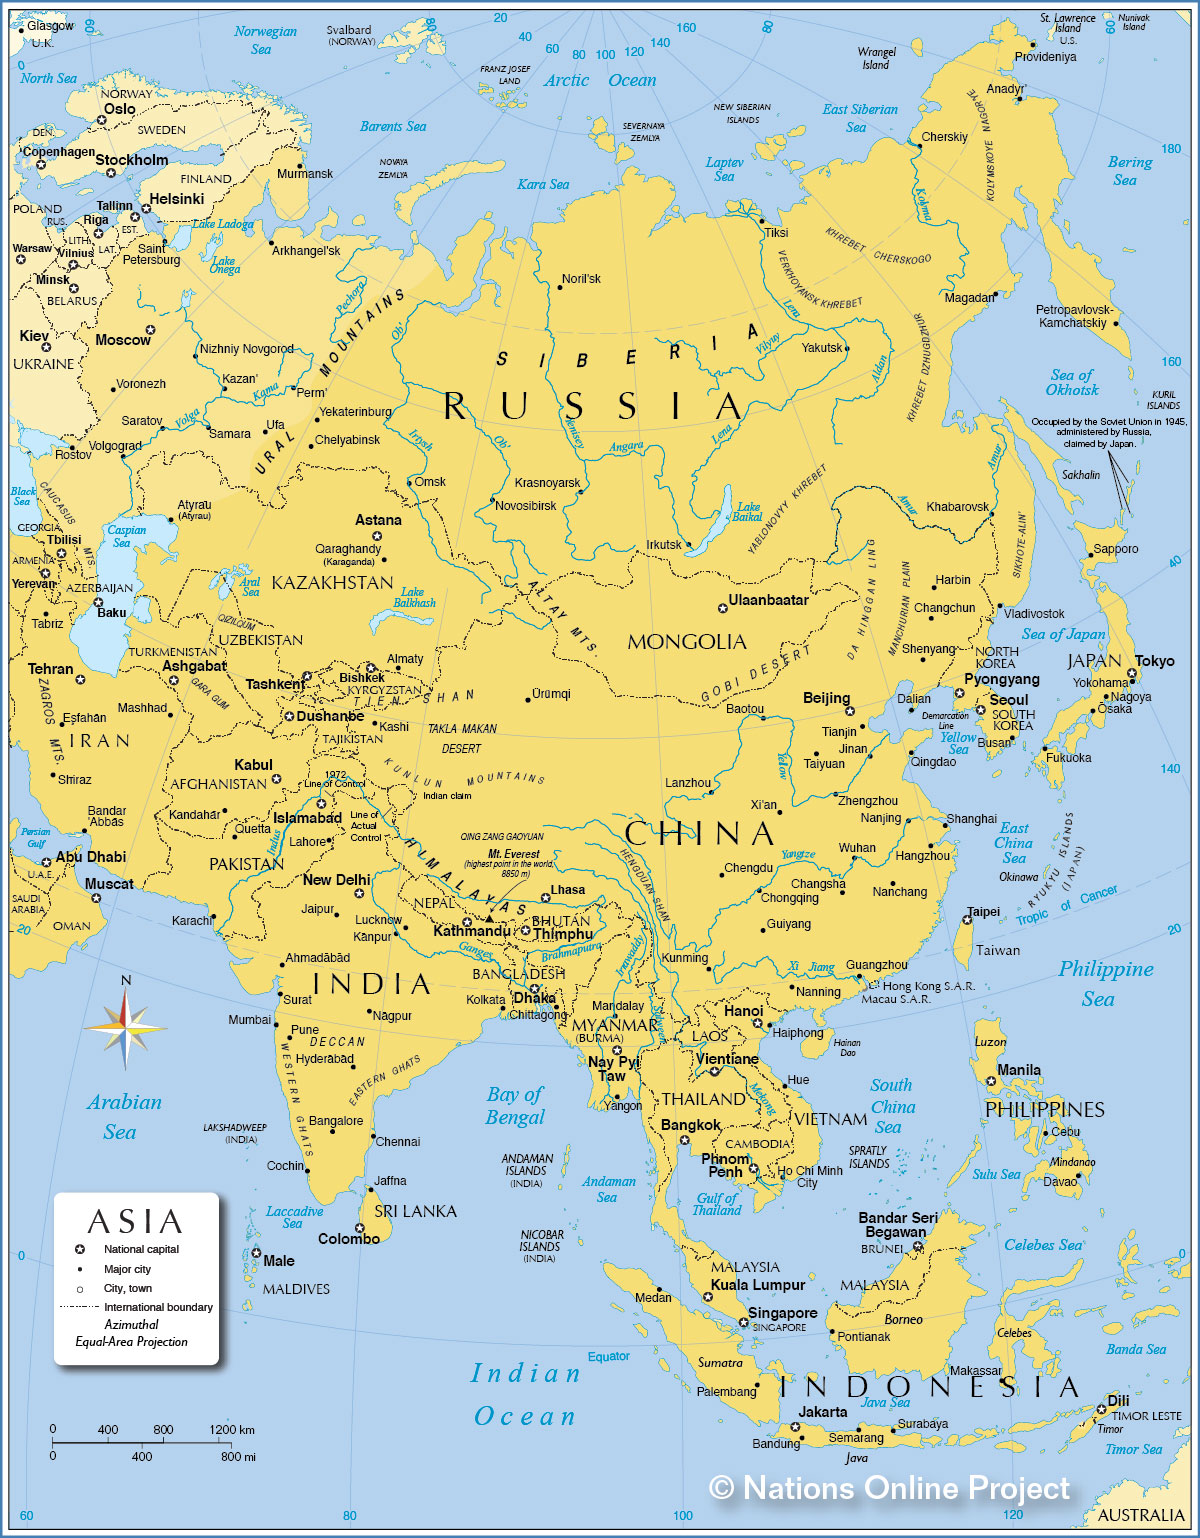 labeled asia map with country names and capitals 25 New Map Of Asia With Countries And Capitals Labeled labeled asia map with country names and capitals